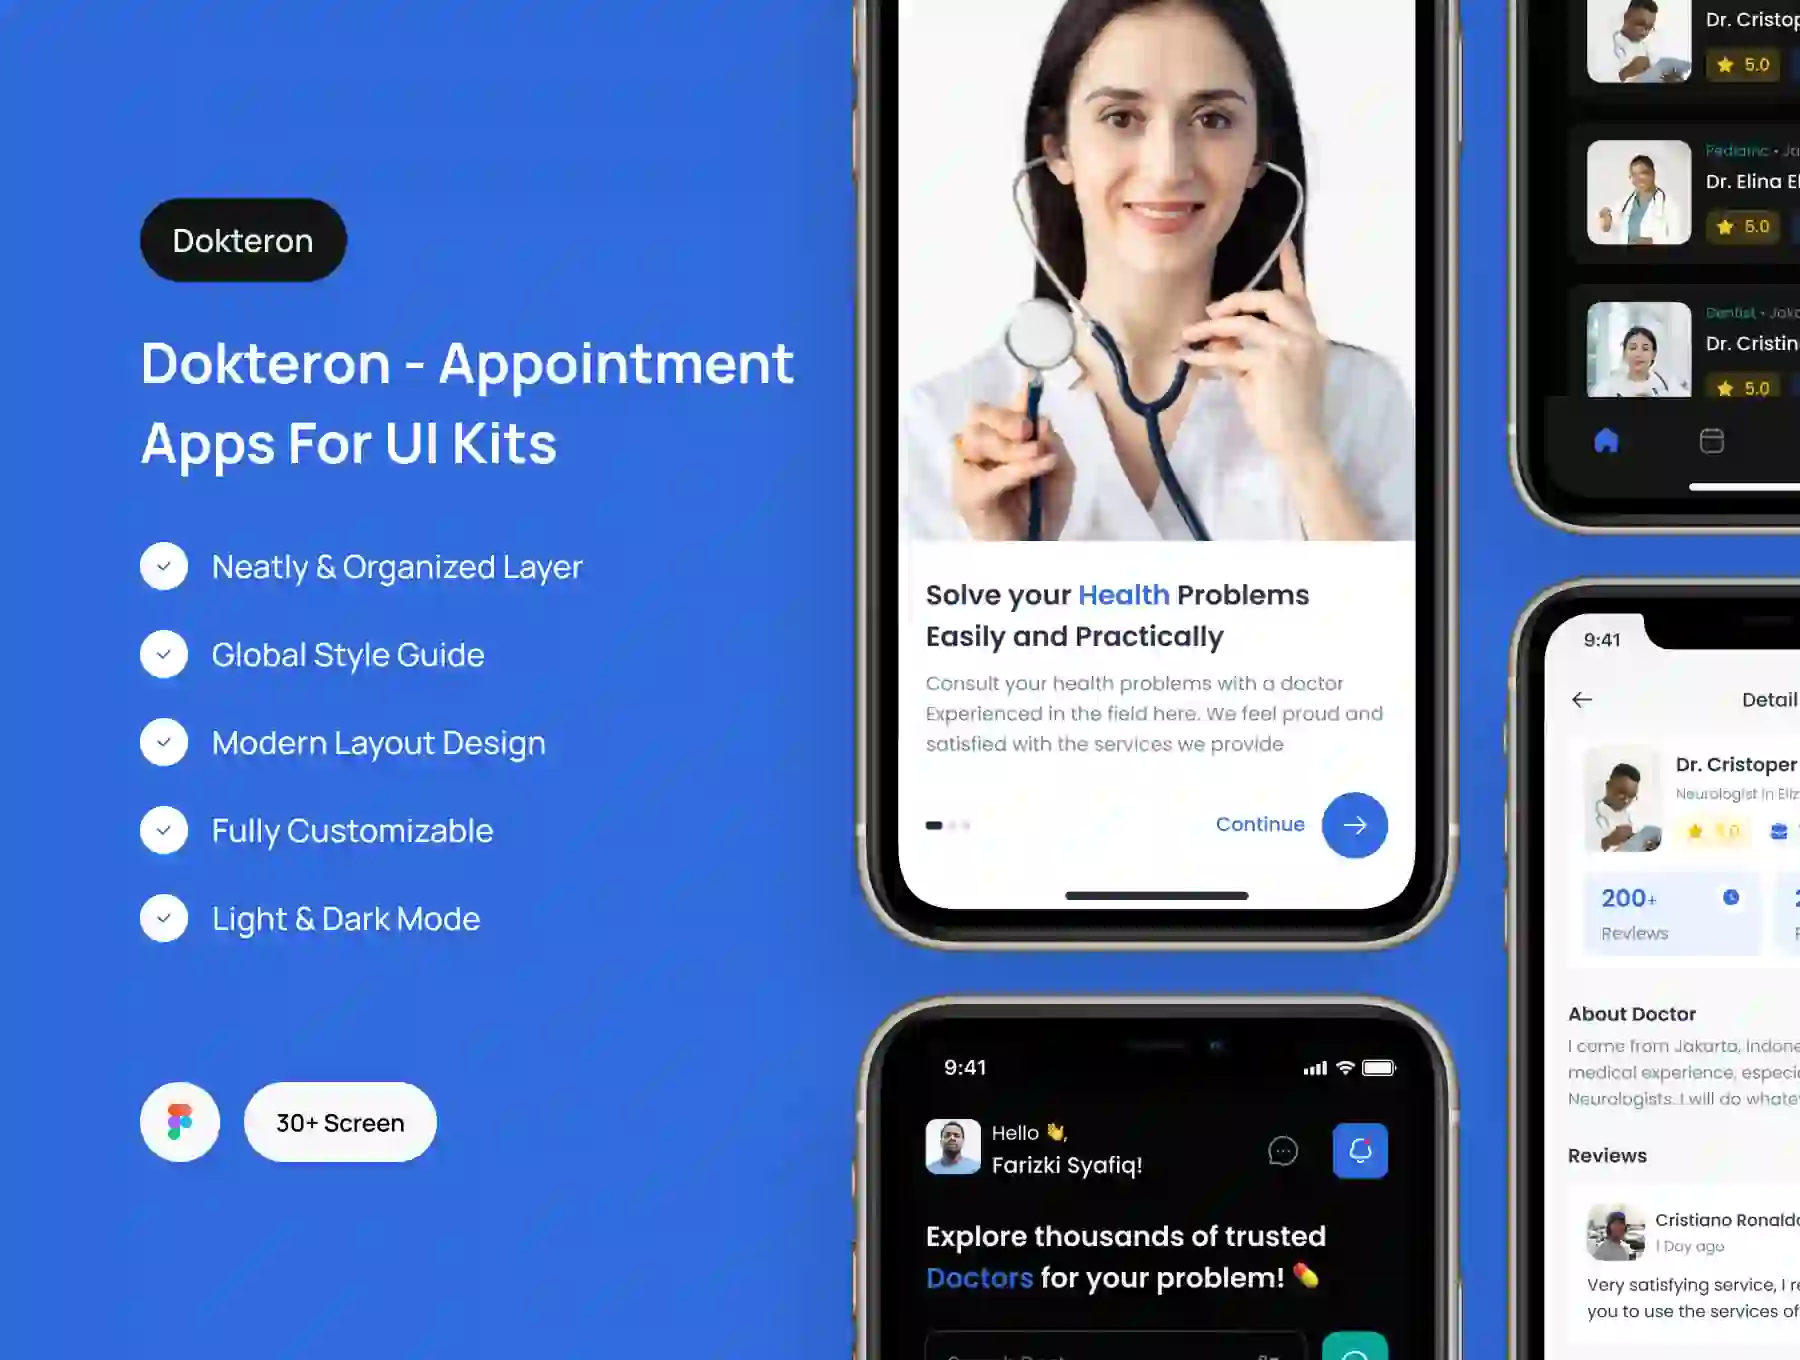 Docteron - Appointment Doctor App